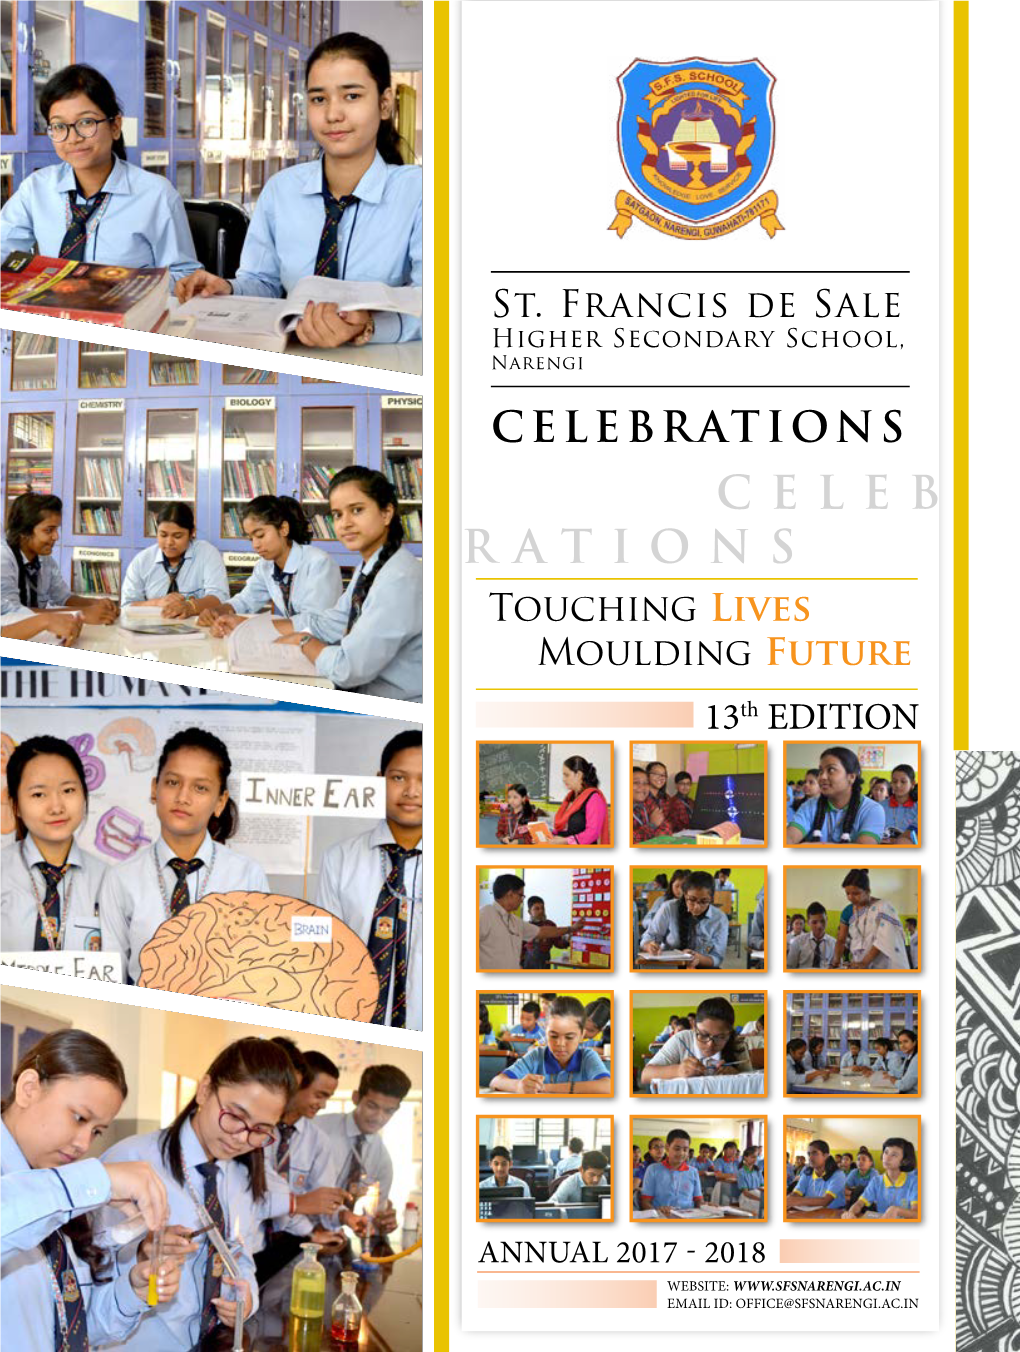 CELEB RATIONS Touching Lives Moulding Future 13Th EDITION